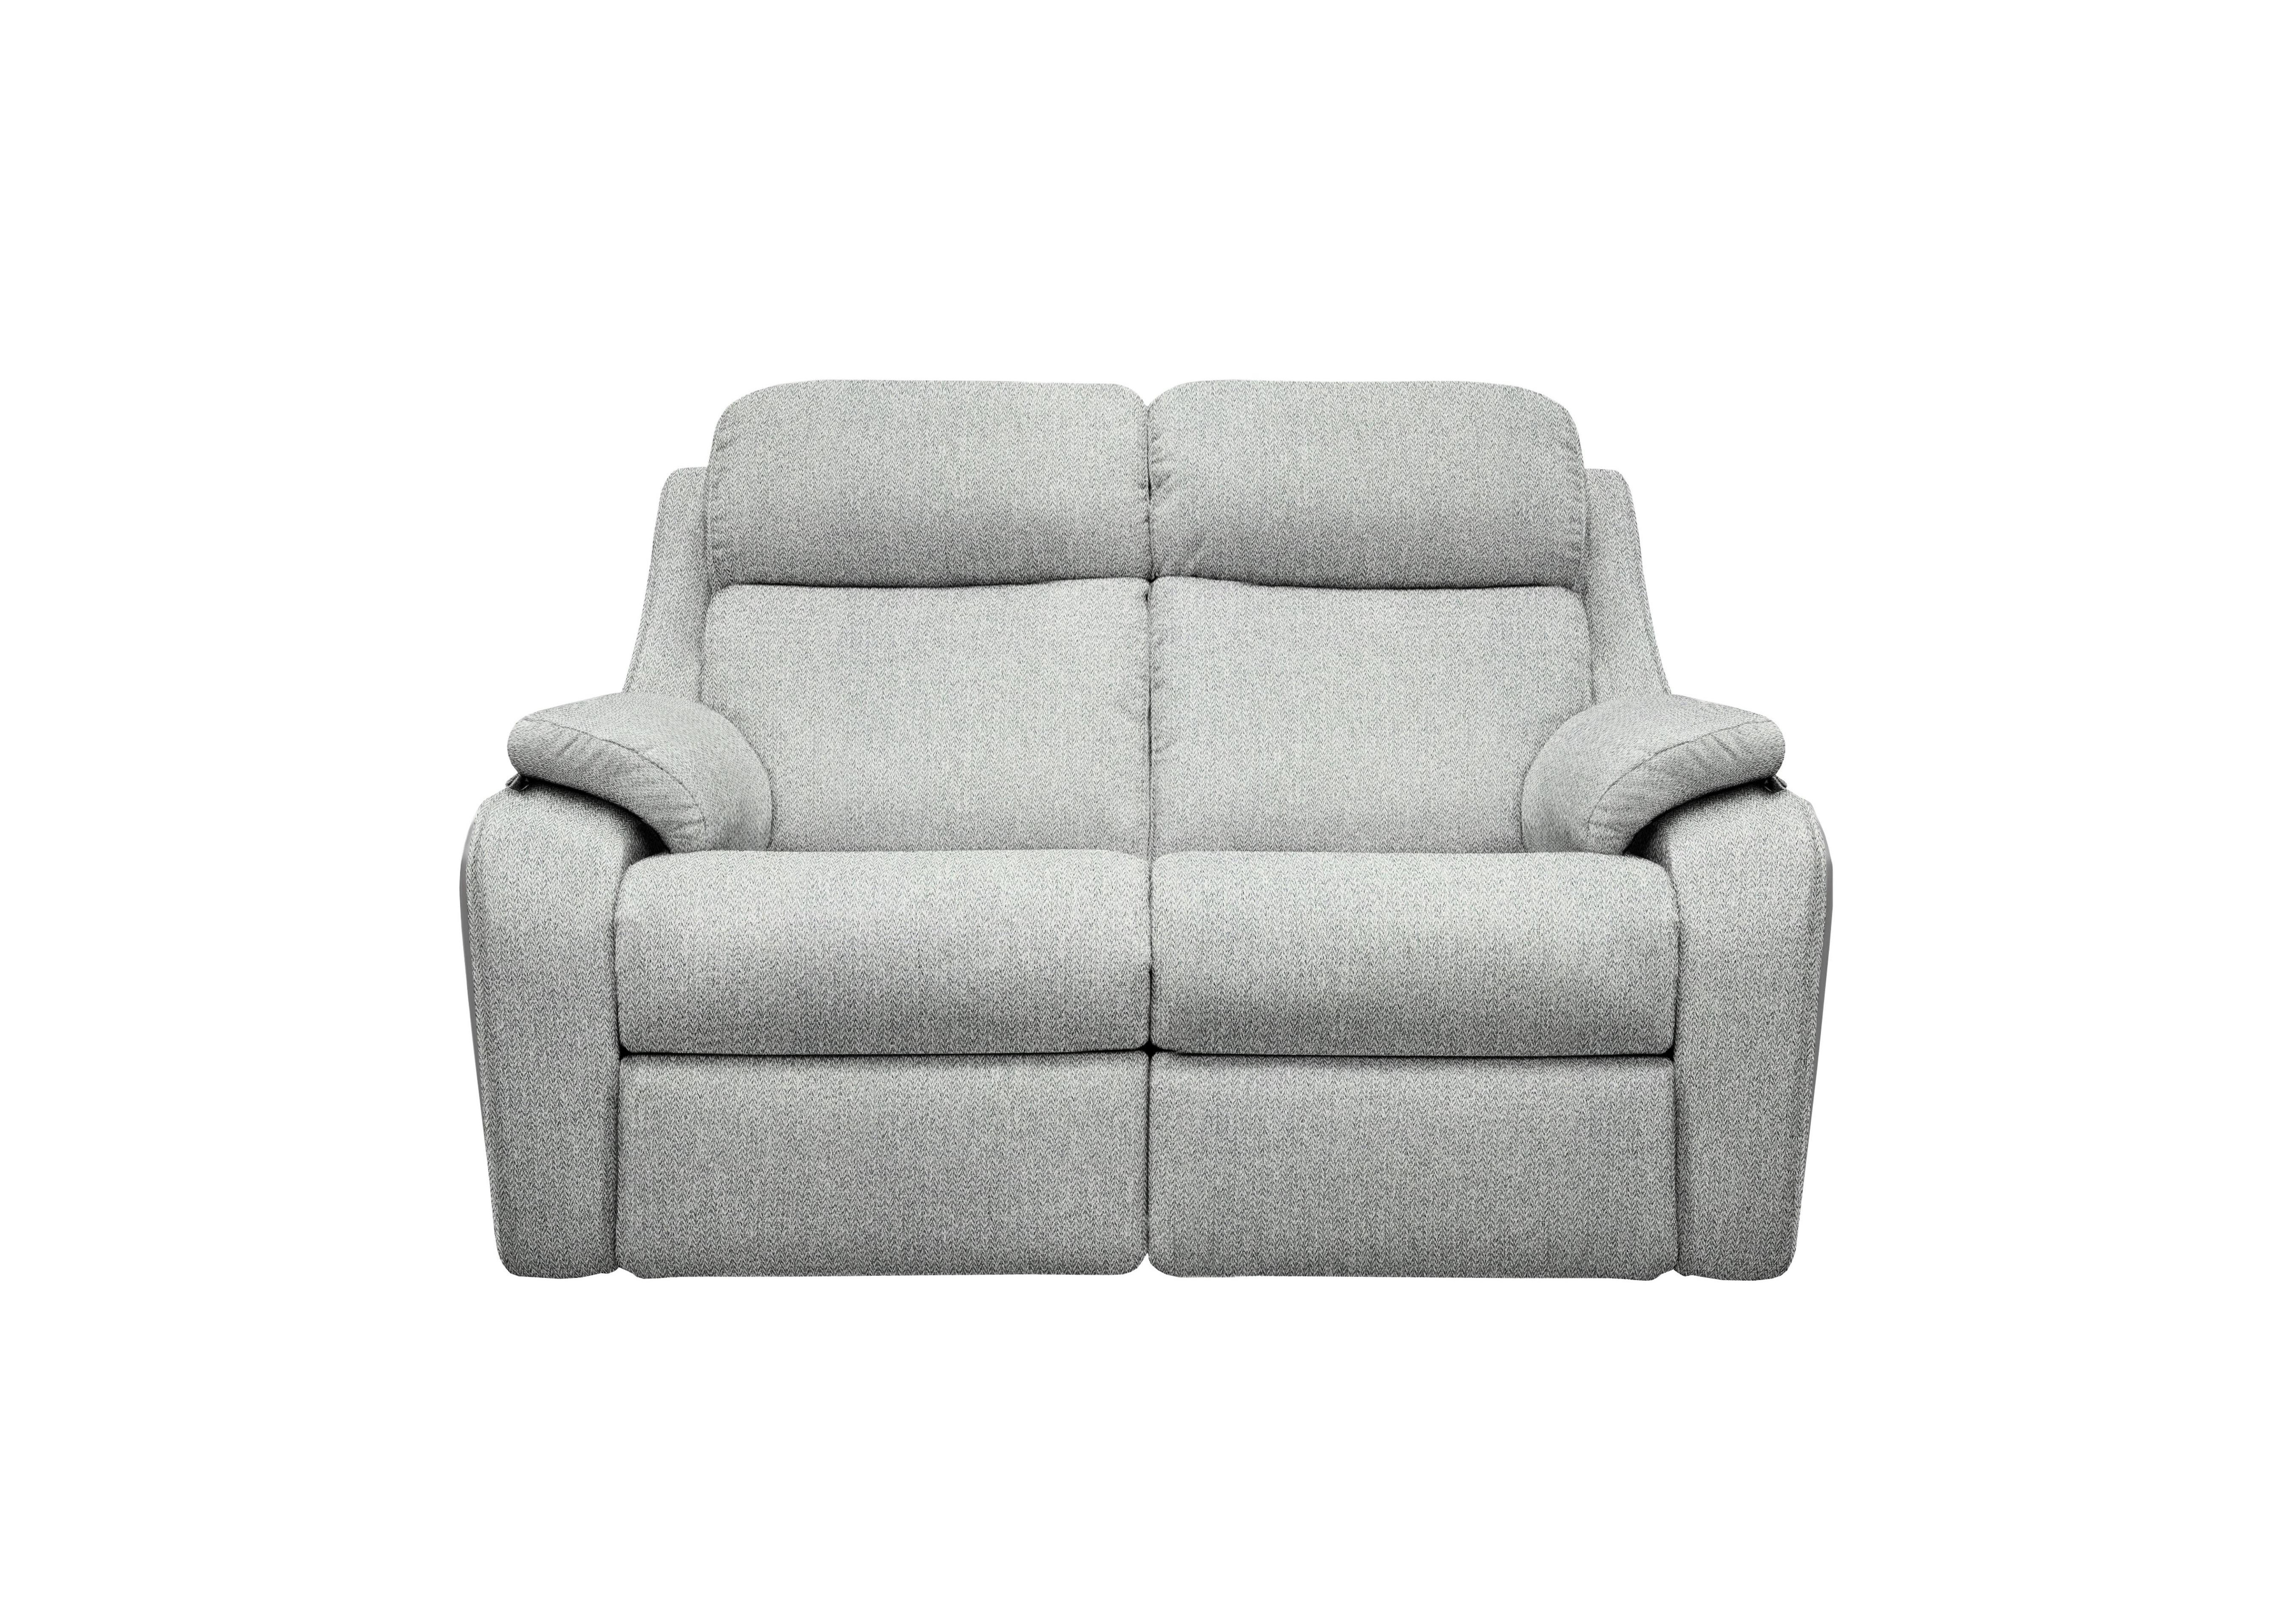 Kingsbury 2 Seater Fabric Power Recliner Sofa with Power Headrests in A011 Swift Cygnet on Furniture Village